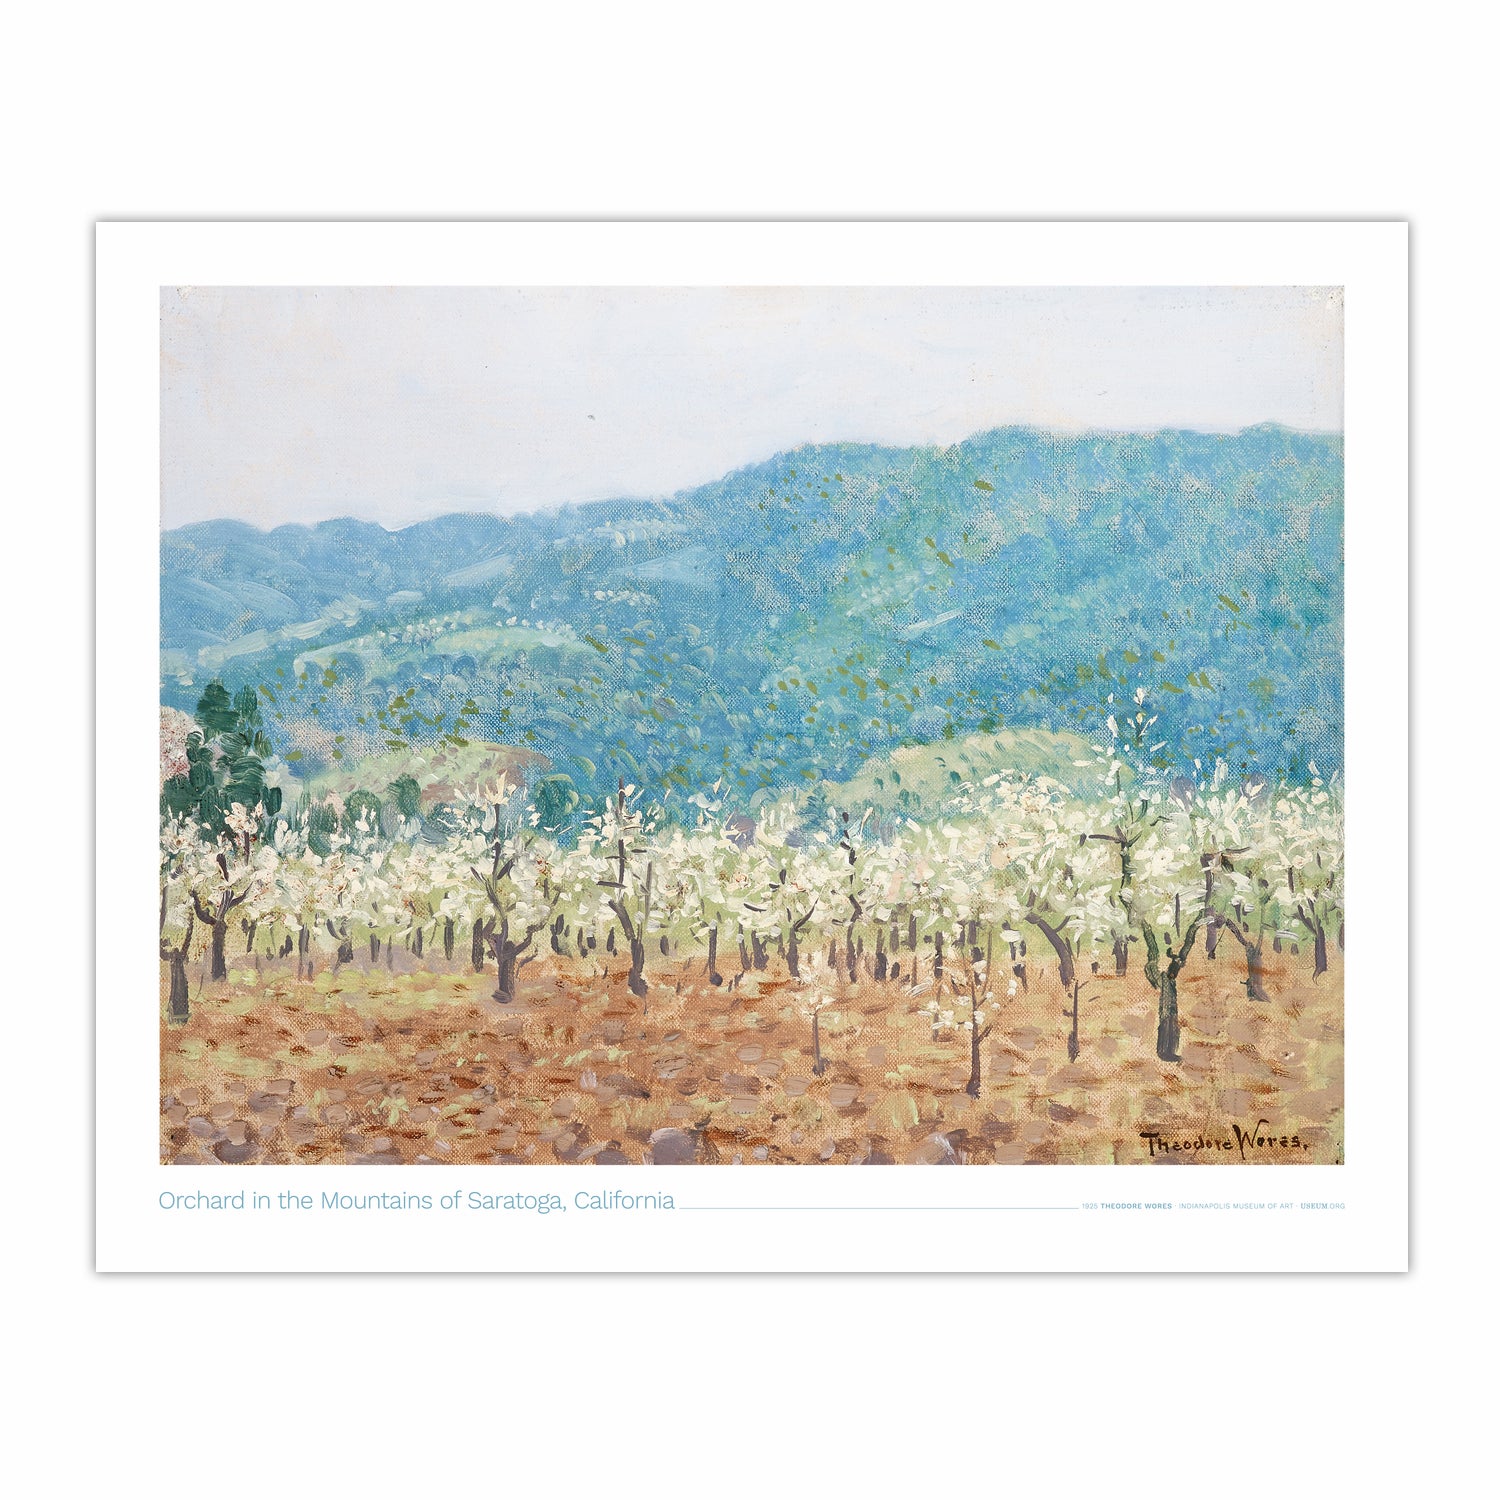 Orchard in the Mountains of Saratoga, California